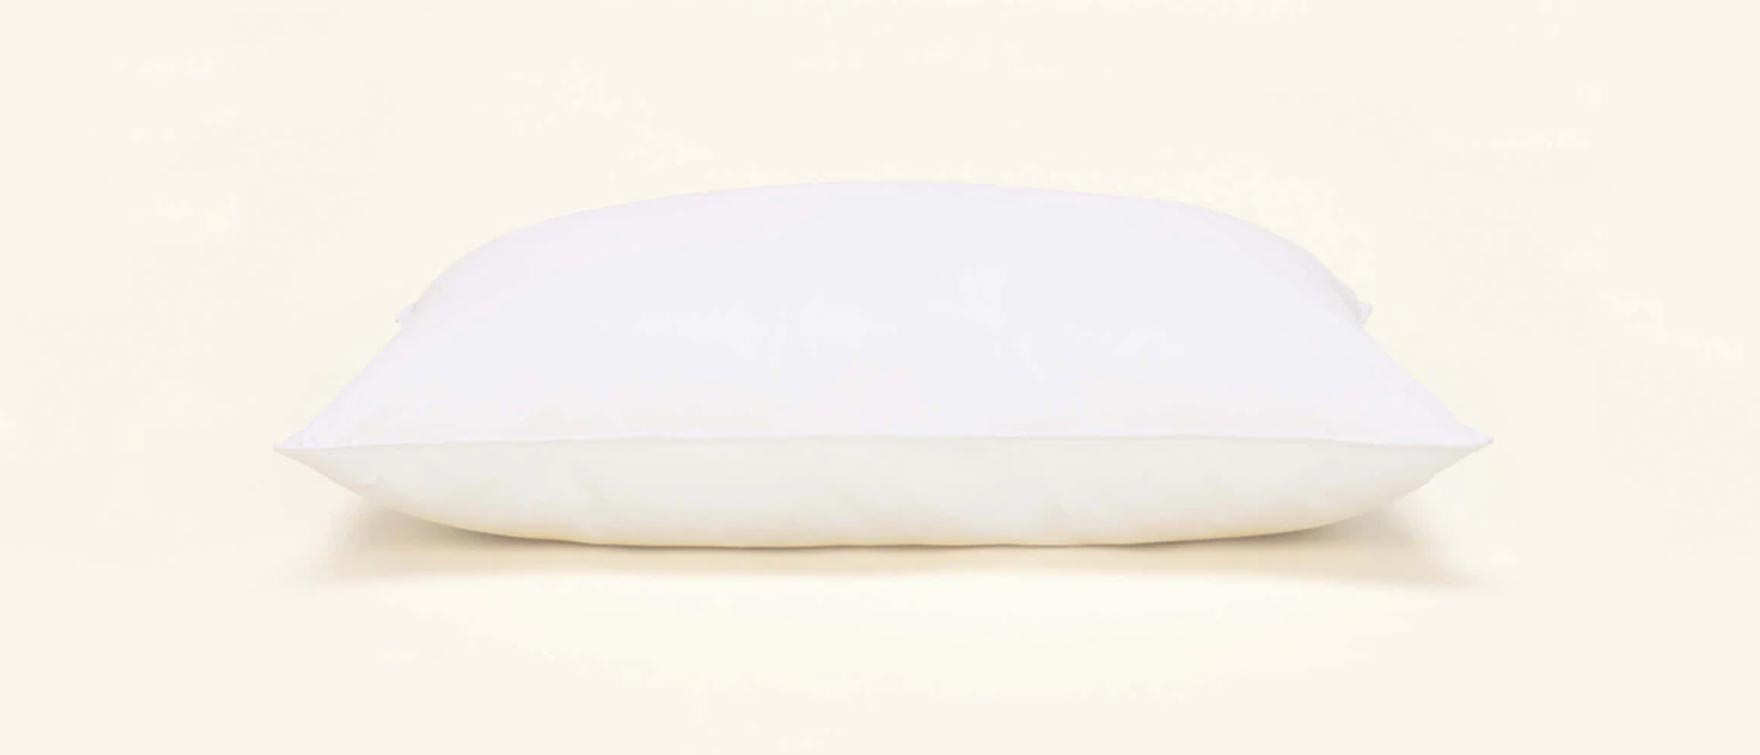 3. Best Cooling Pillow for Stomach Sleepers: Slumber Cloud Core Down Alternative Pillow